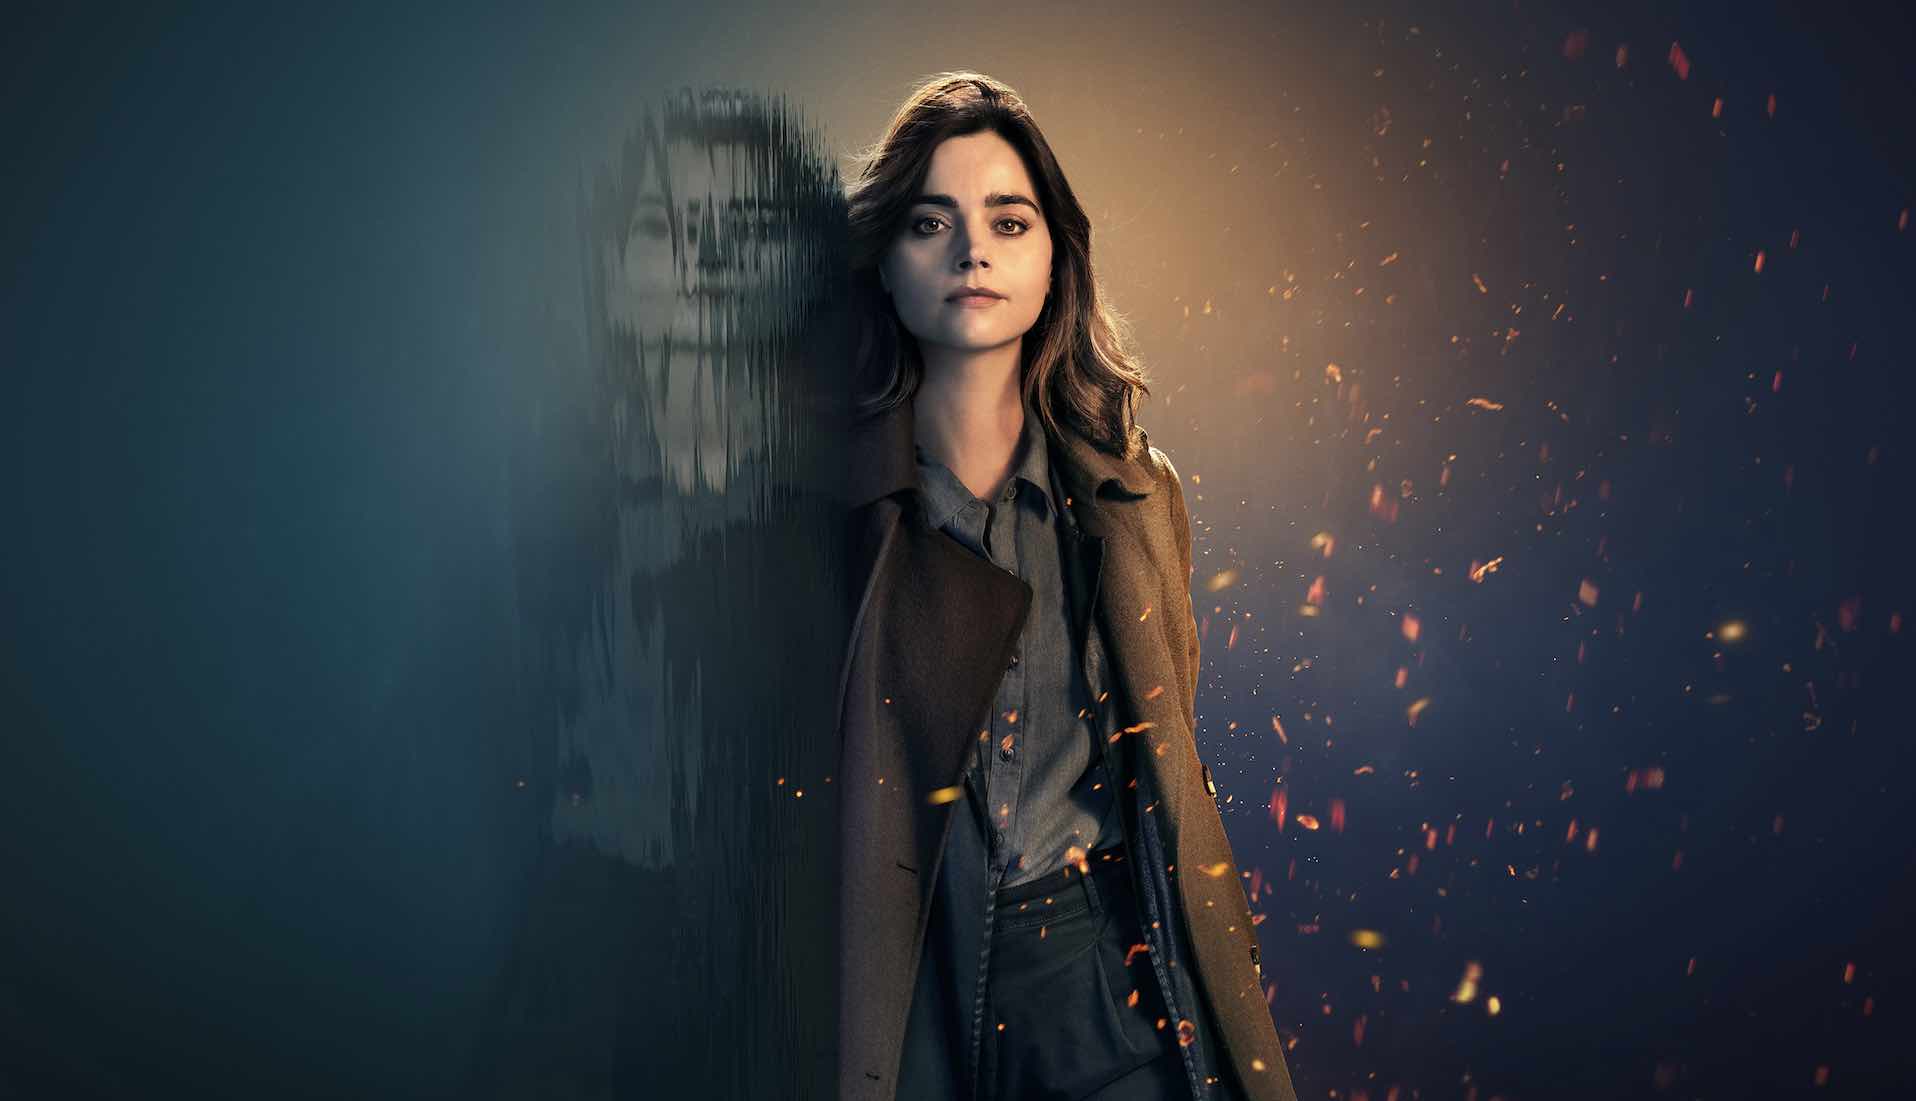 First trailer and key art for The Jetty starring Jenna Coleman has been released